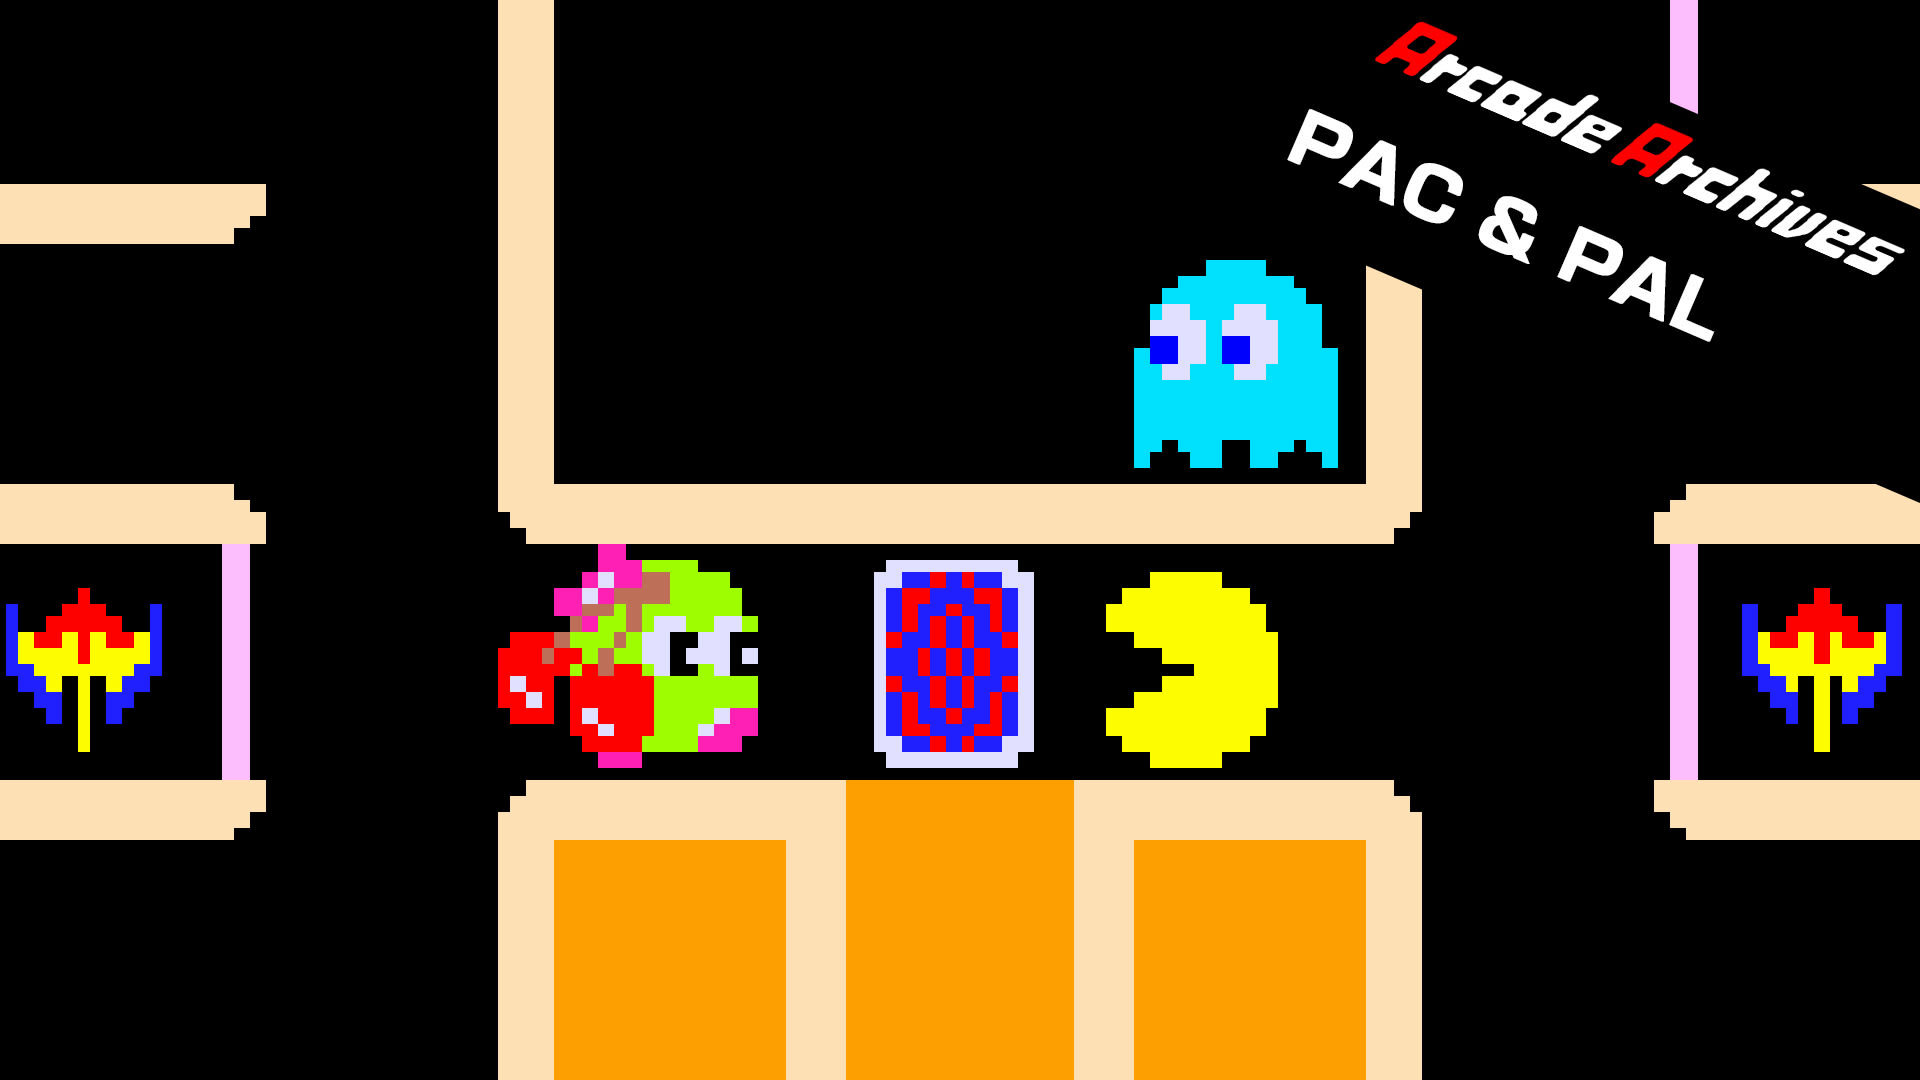 Arcade Archives PAC & PAL